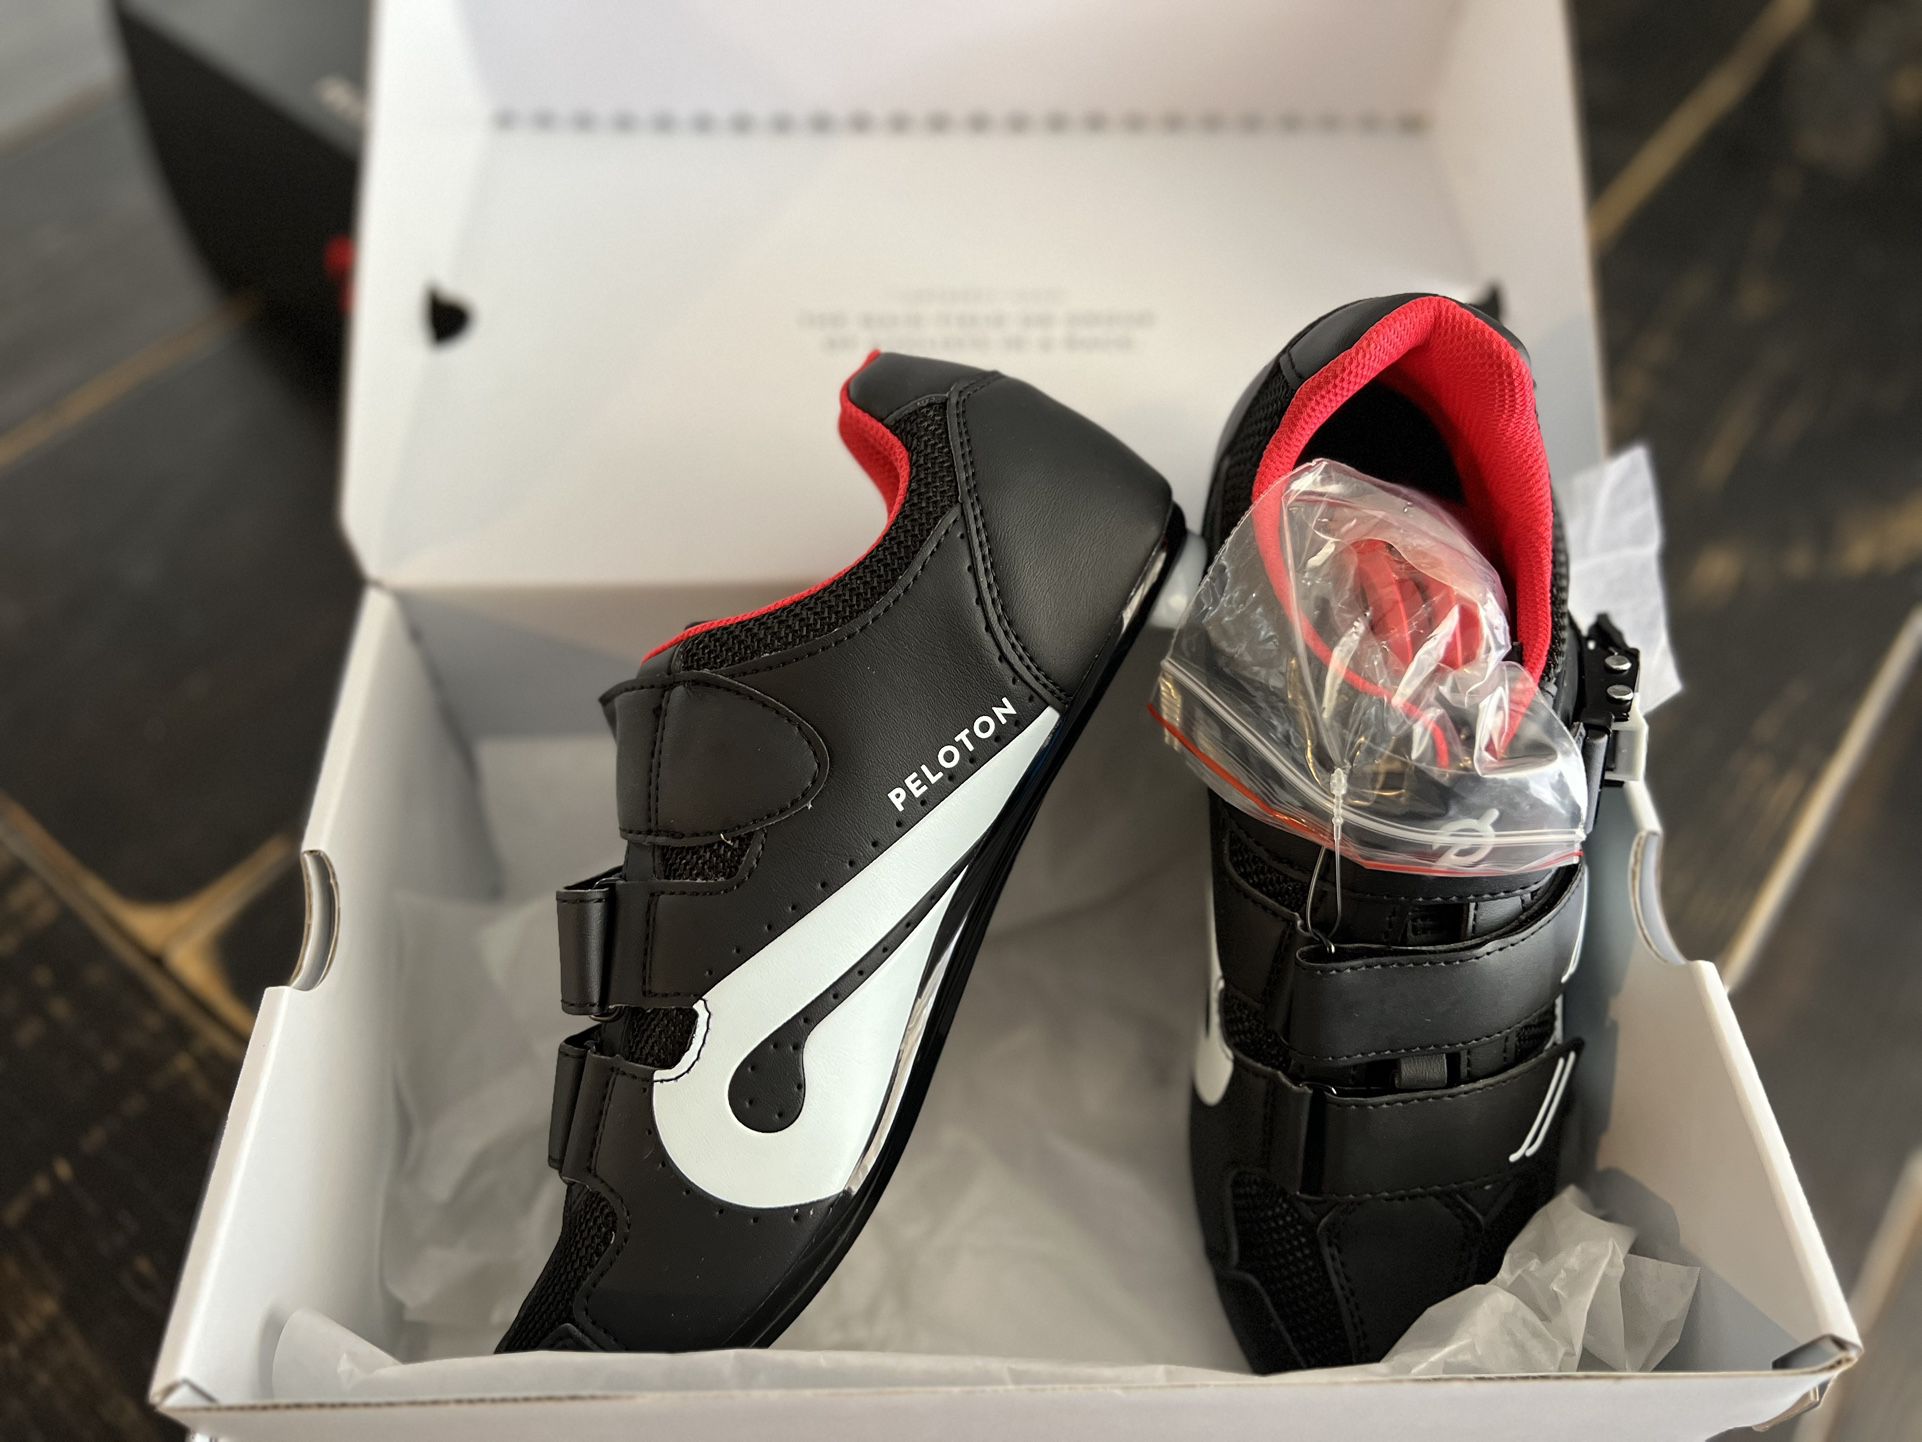 New / Never Used Peloton Cycling Shoes for Peloton Bike and Bike+ with Delta-Compatible Bike Cleats - Size 8.5 / 39